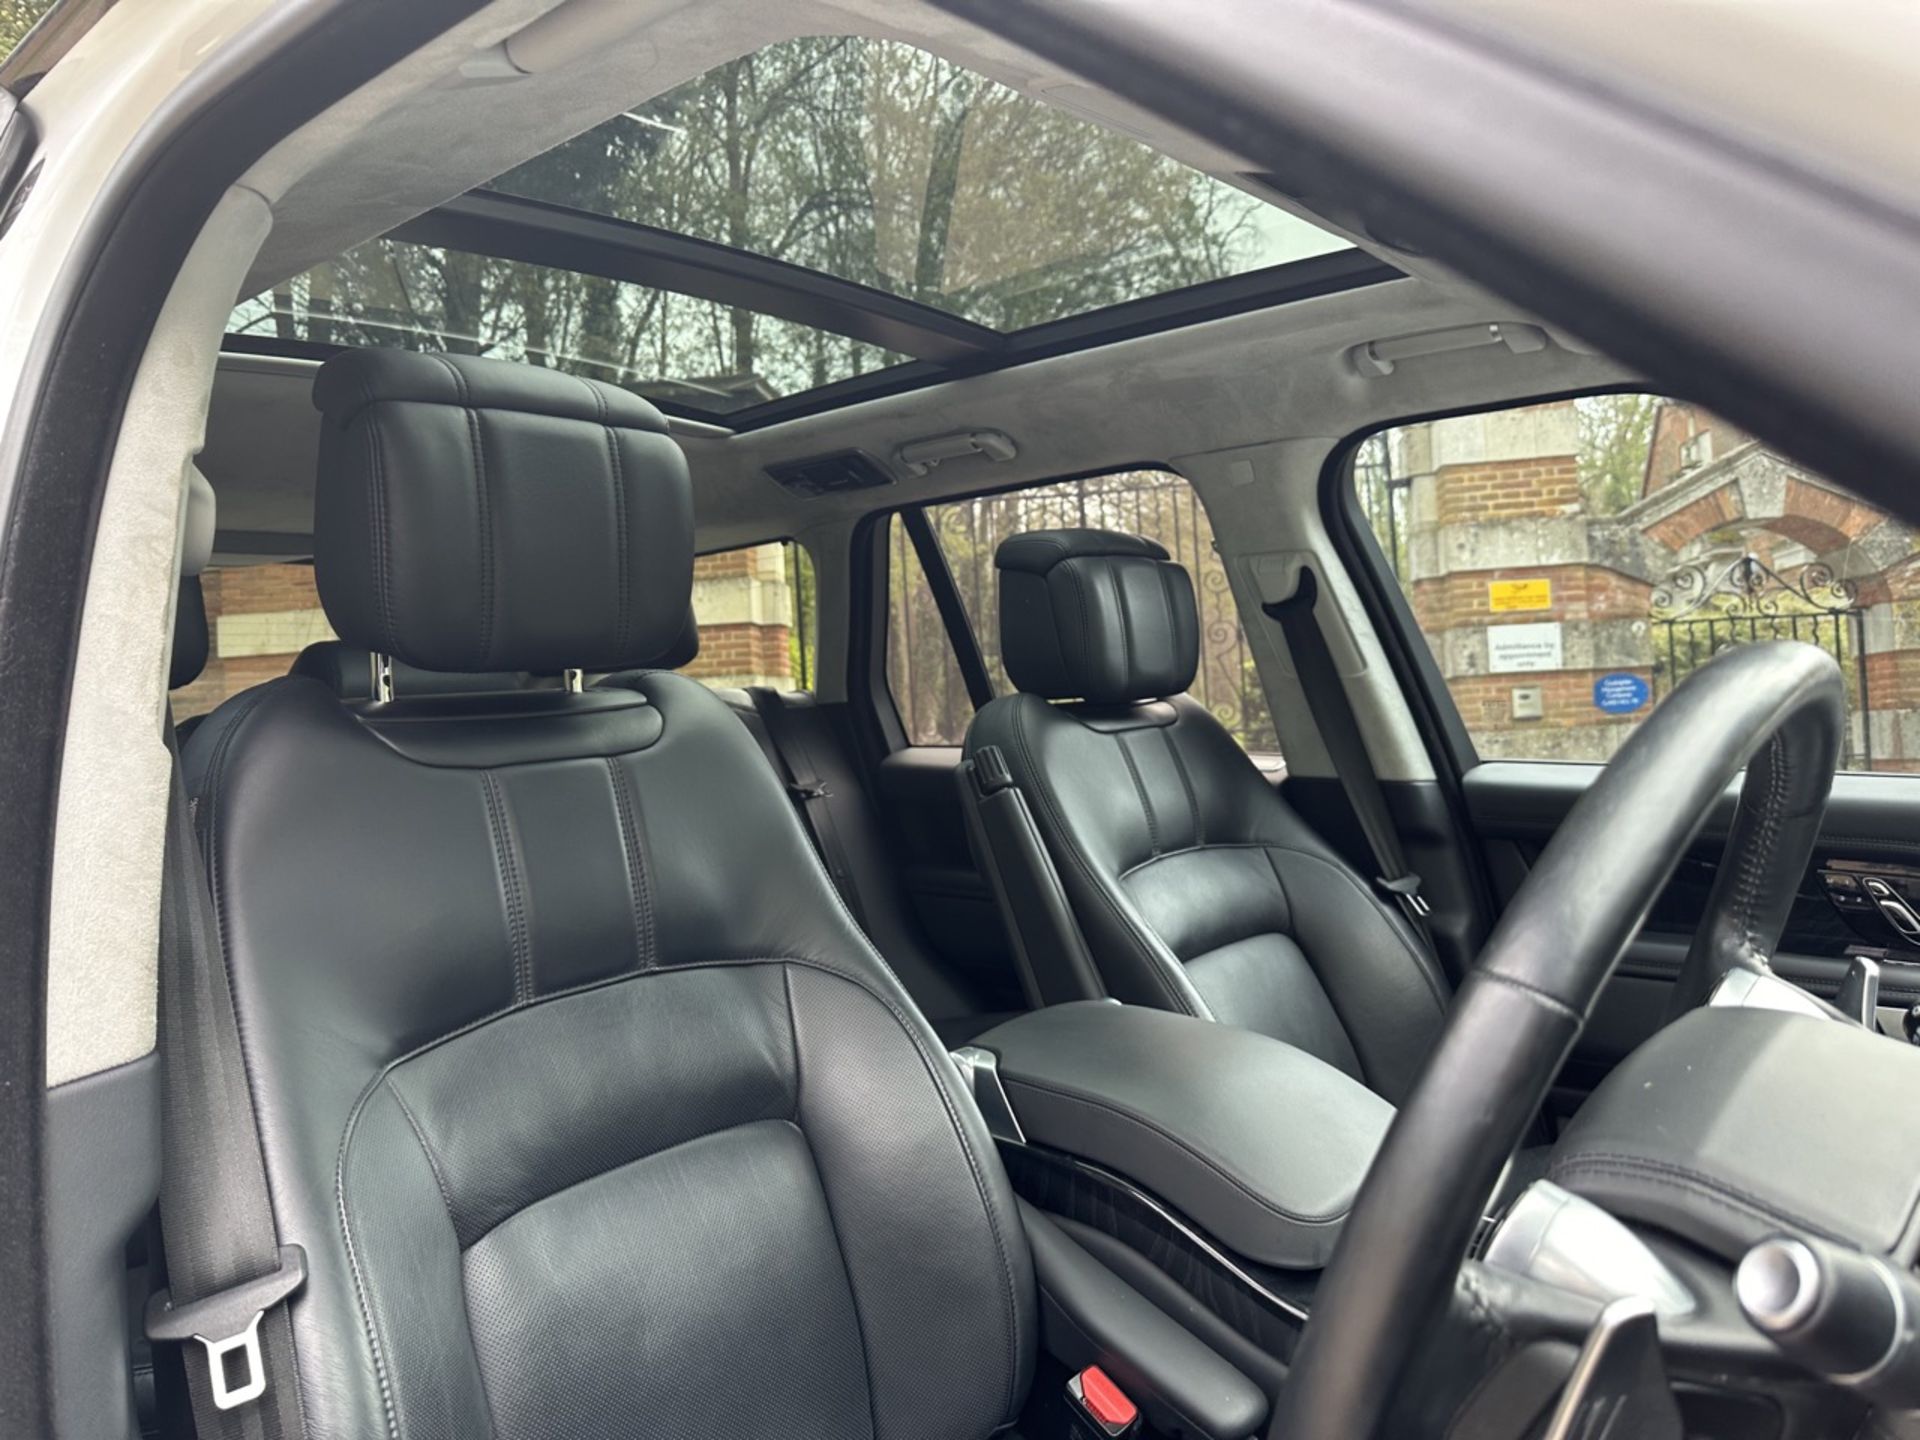 LAND ROVER RANGE ROVER 2.0 P400e Autobiography 4dr Auto - Automatic - 2018 - 31k miles - FULL SH - Image 11 of 22